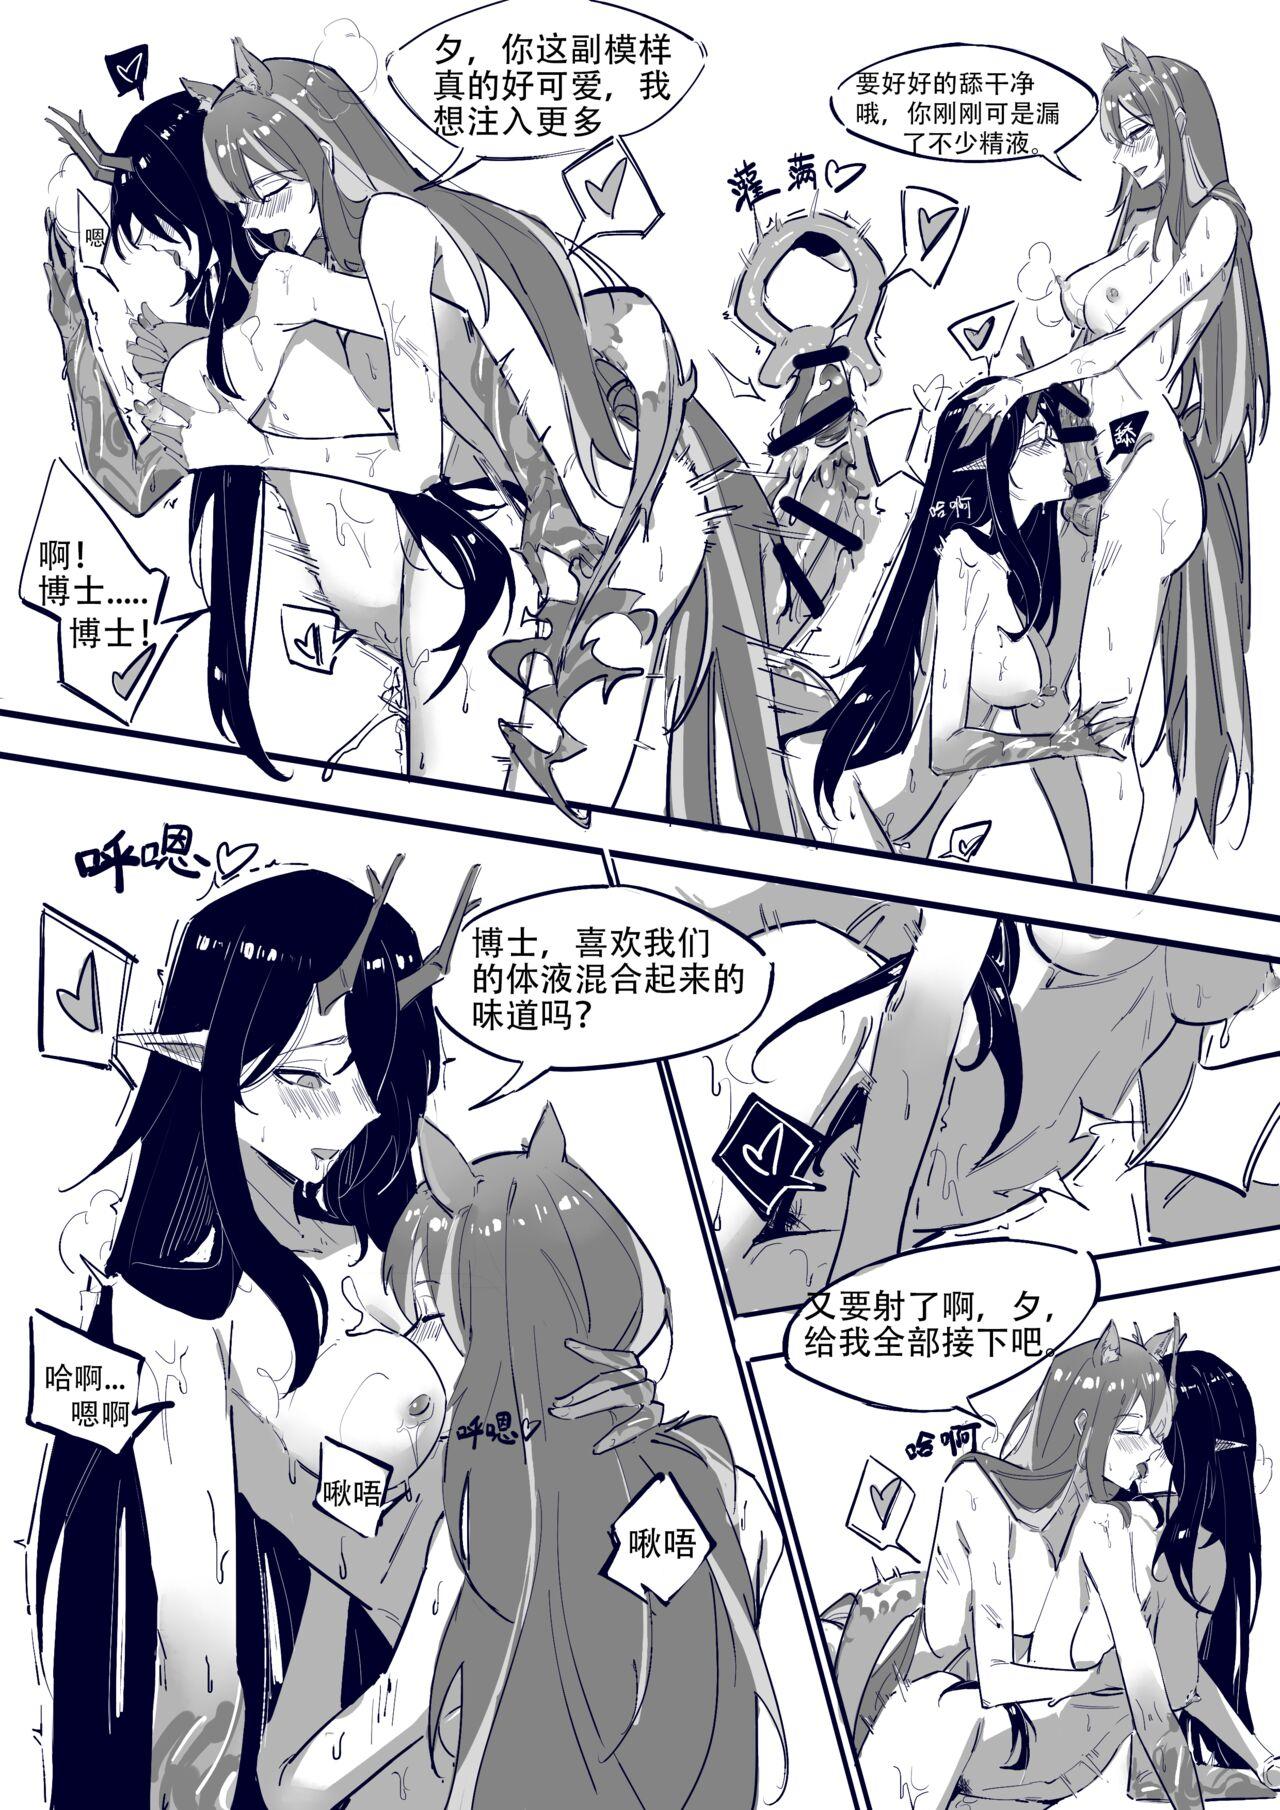 Tight Cunt 博士大战龙泡泡（上篇） - Arknights Big - Page 10